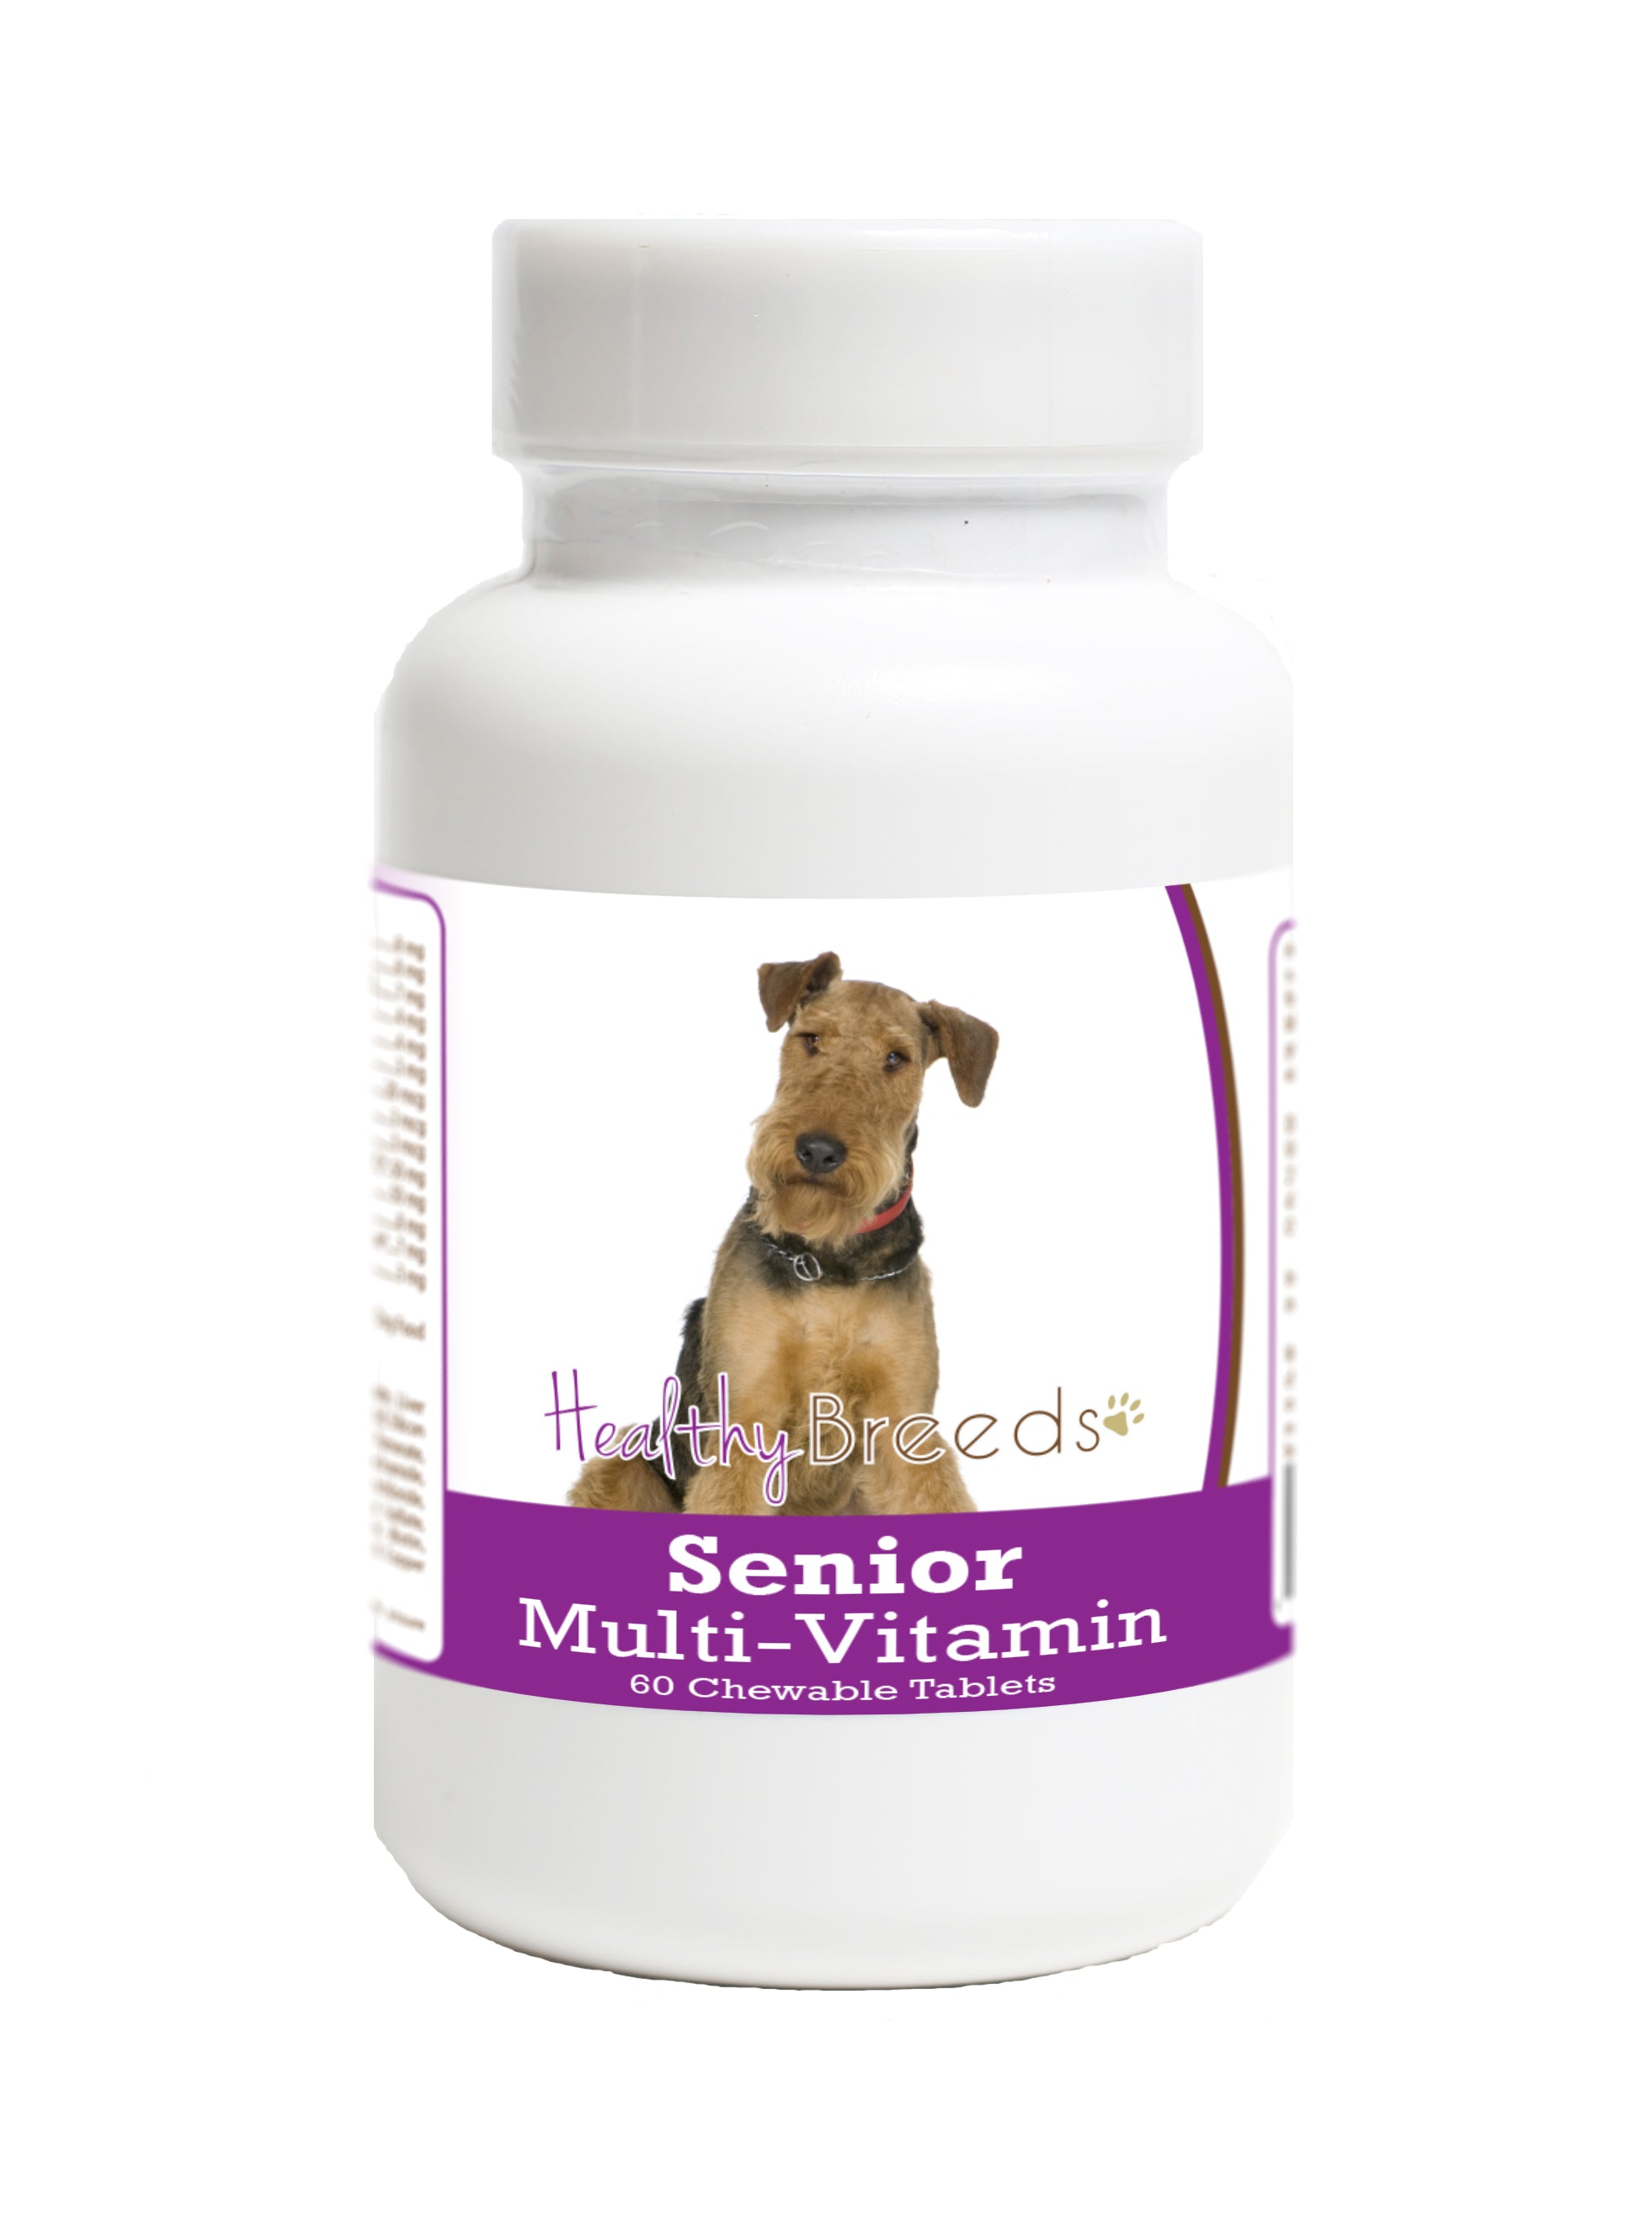 Airedale Terrier Senior Dog Multivitamin Tablets 60 Count